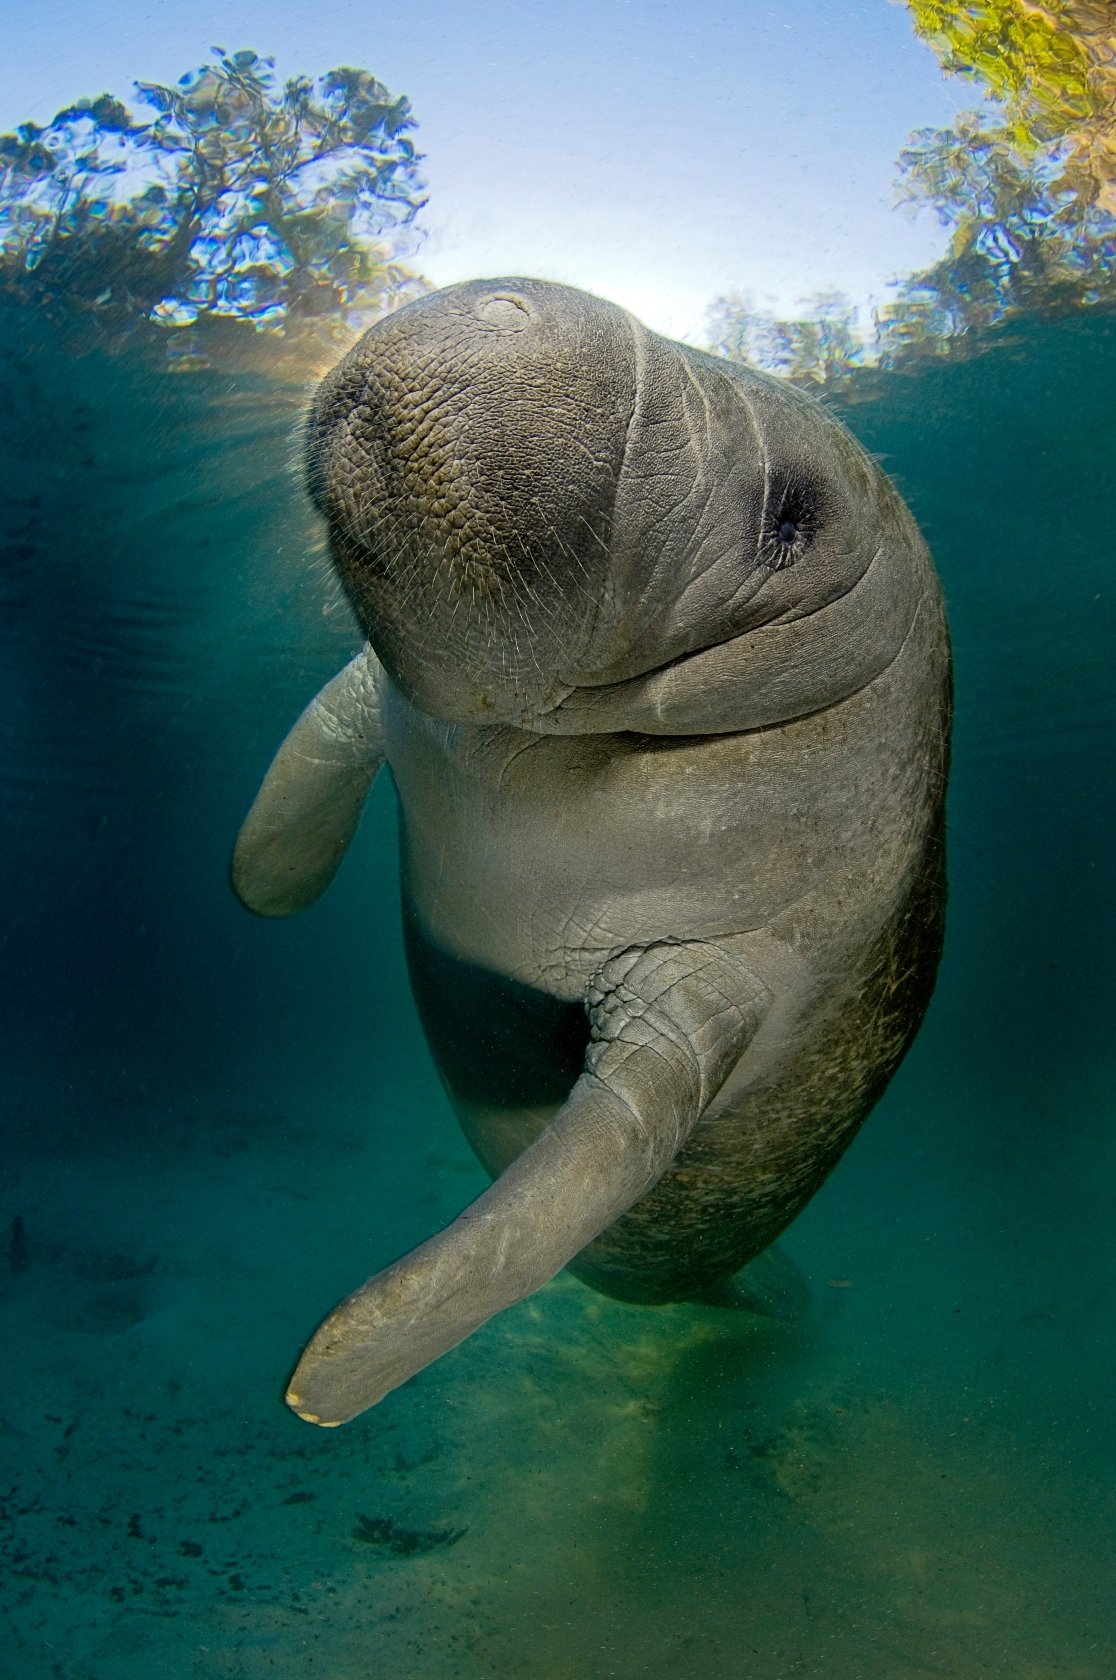 A young Florida manatee (Trichechus manatus latirostrus) stays warm in a freshwater spring in winter, at dawn at the Three Sisters Spring, Crystal River, Florida, U.S., January 2020. (Photo courtesy of WWF)